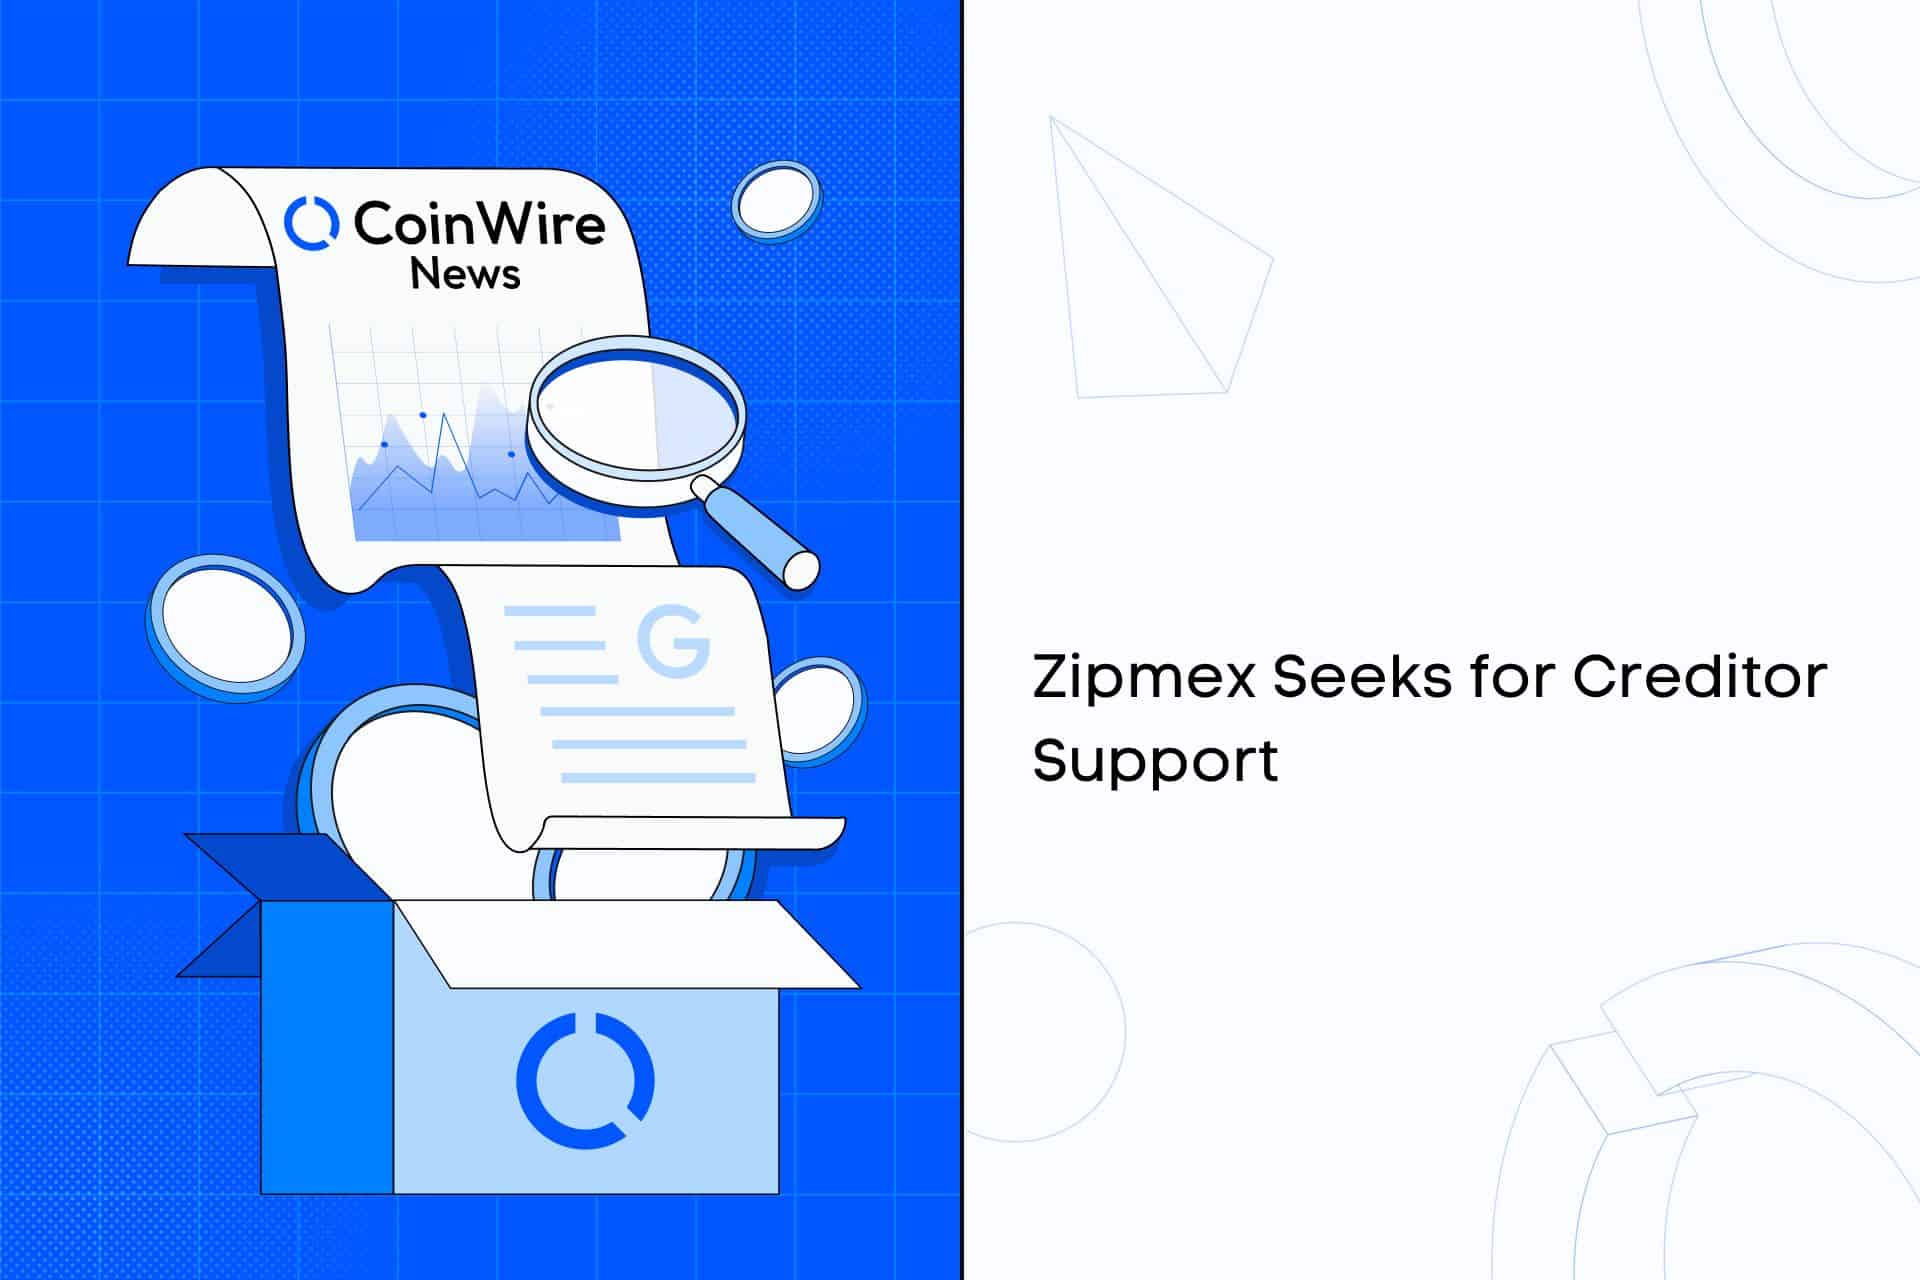 Zipmex Seeks For Creditor Support